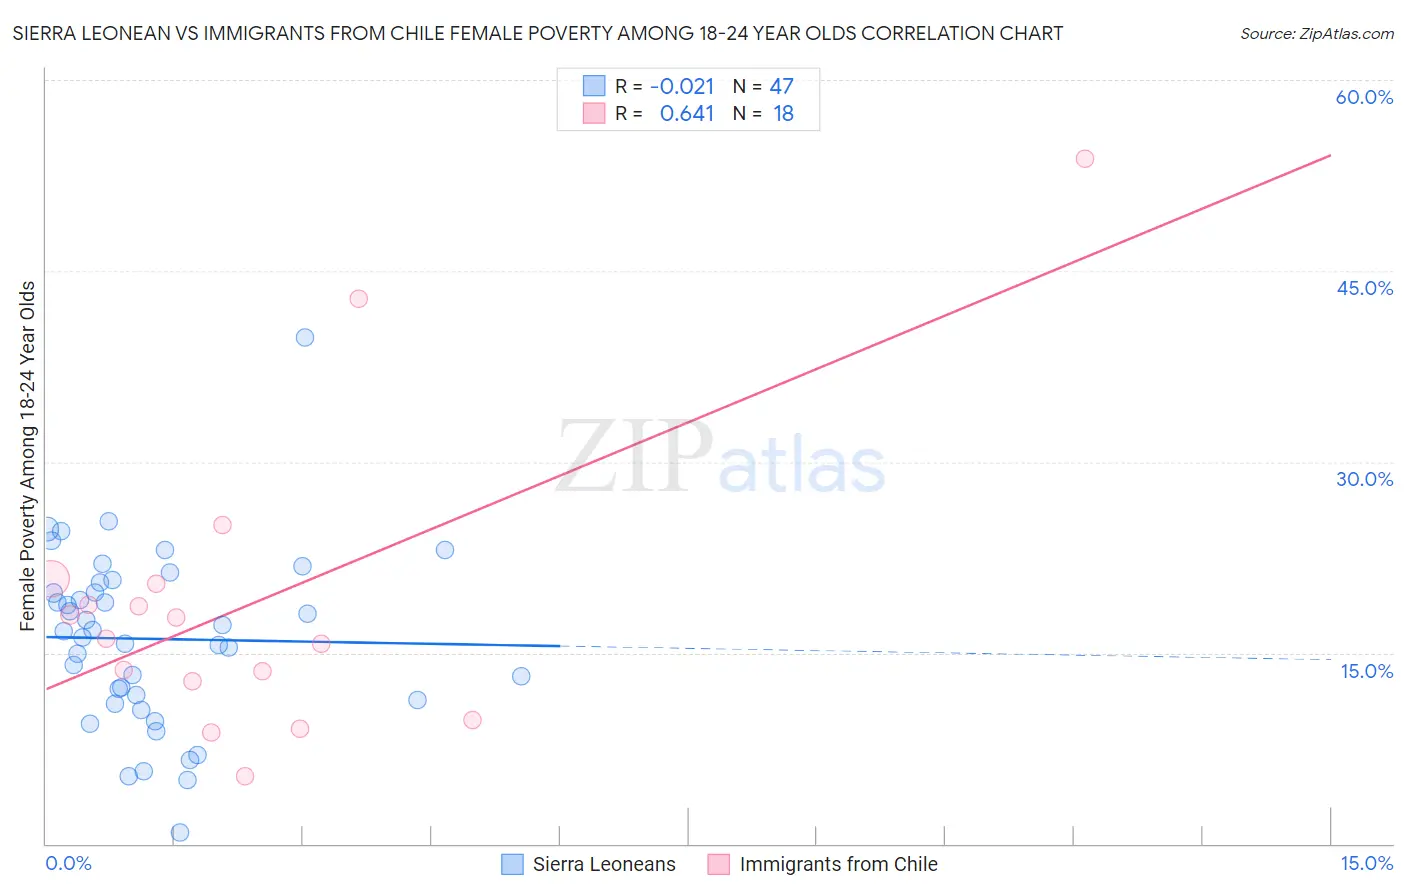 Sierra Leonean vs Immigrants from Chile Female Poverty Among 18-24 Year Olds